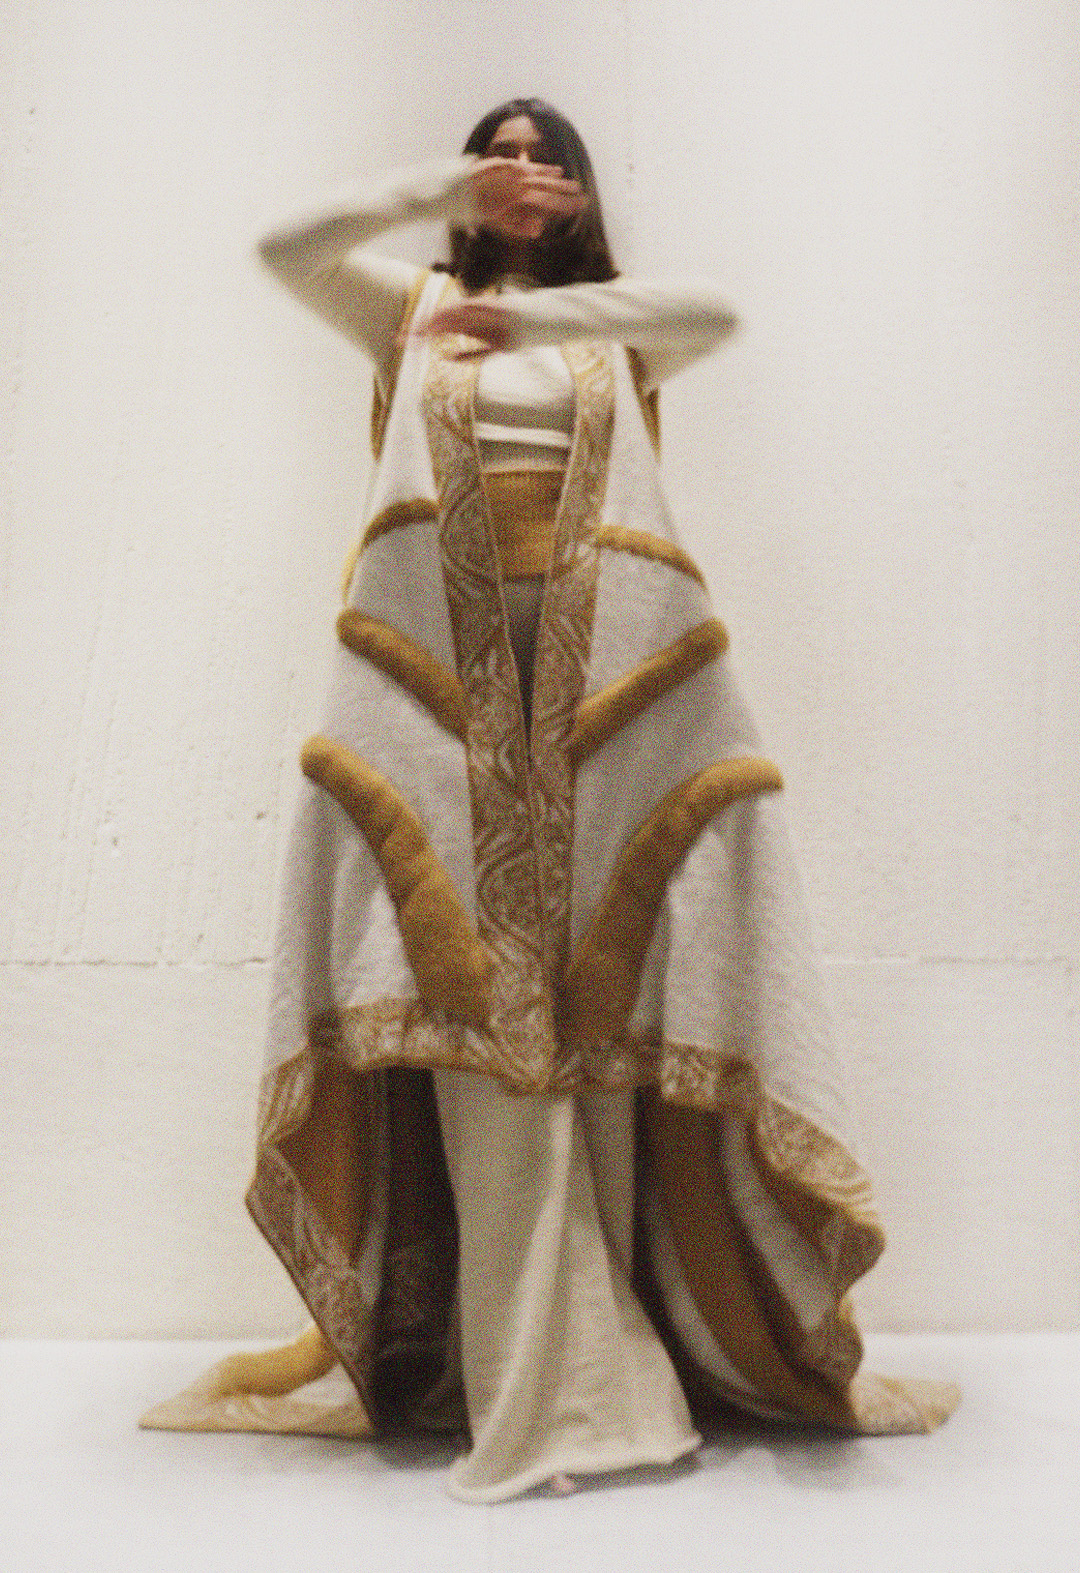 The model is wearing a huge two-color, jacquard pattern reversible cardigan, which has borders all around. The tan pattern lines inspired by sari are stuffed. She is wearing white wide-legged pants, which are a little bit visible below the hemline of the cape. Her hands are up in the air, and the background is white.